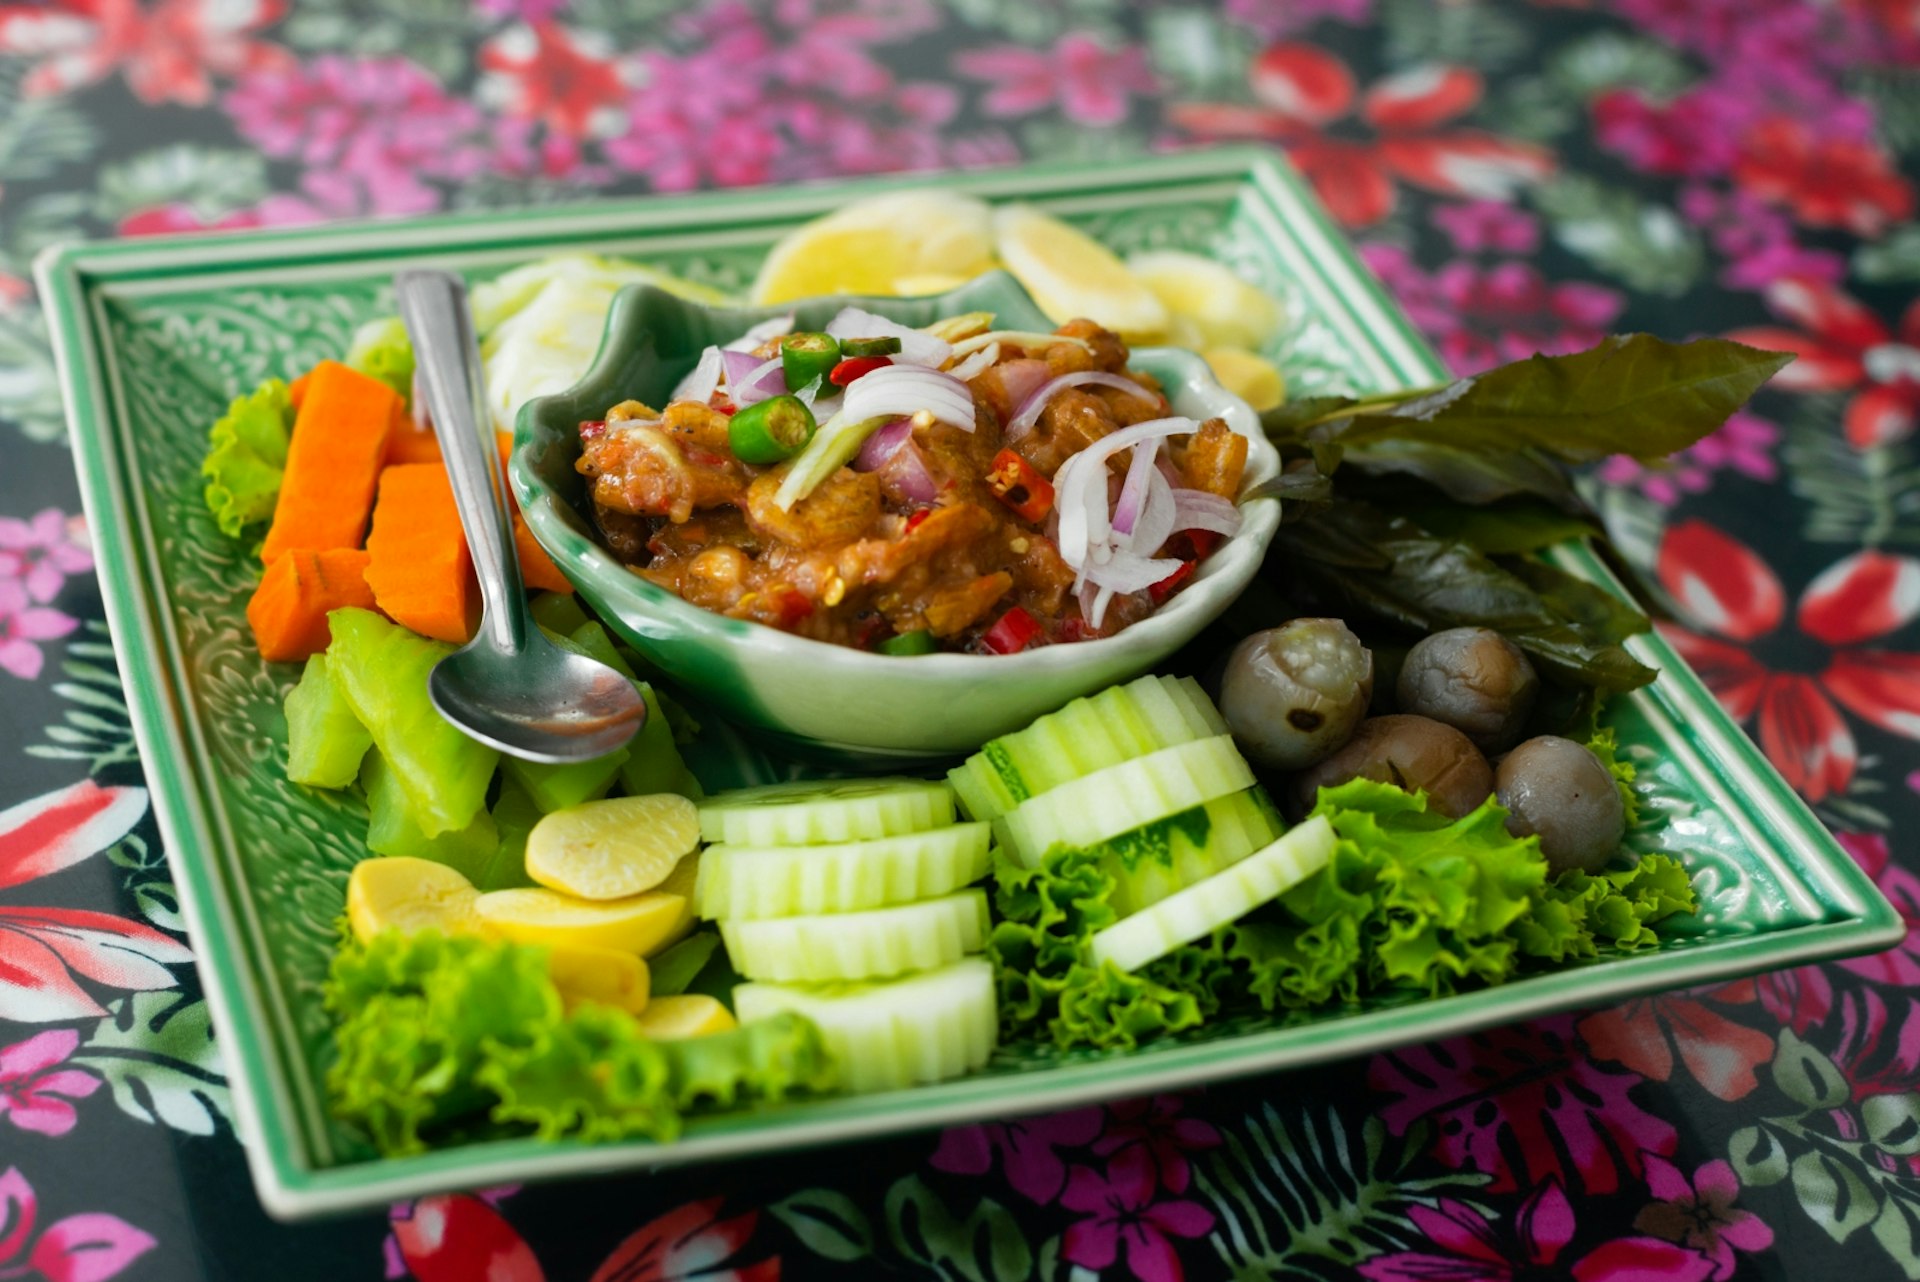 A plate of Phuket's nam prik kung siap with fresh vegetables © Austin Bush / Lonely Planet